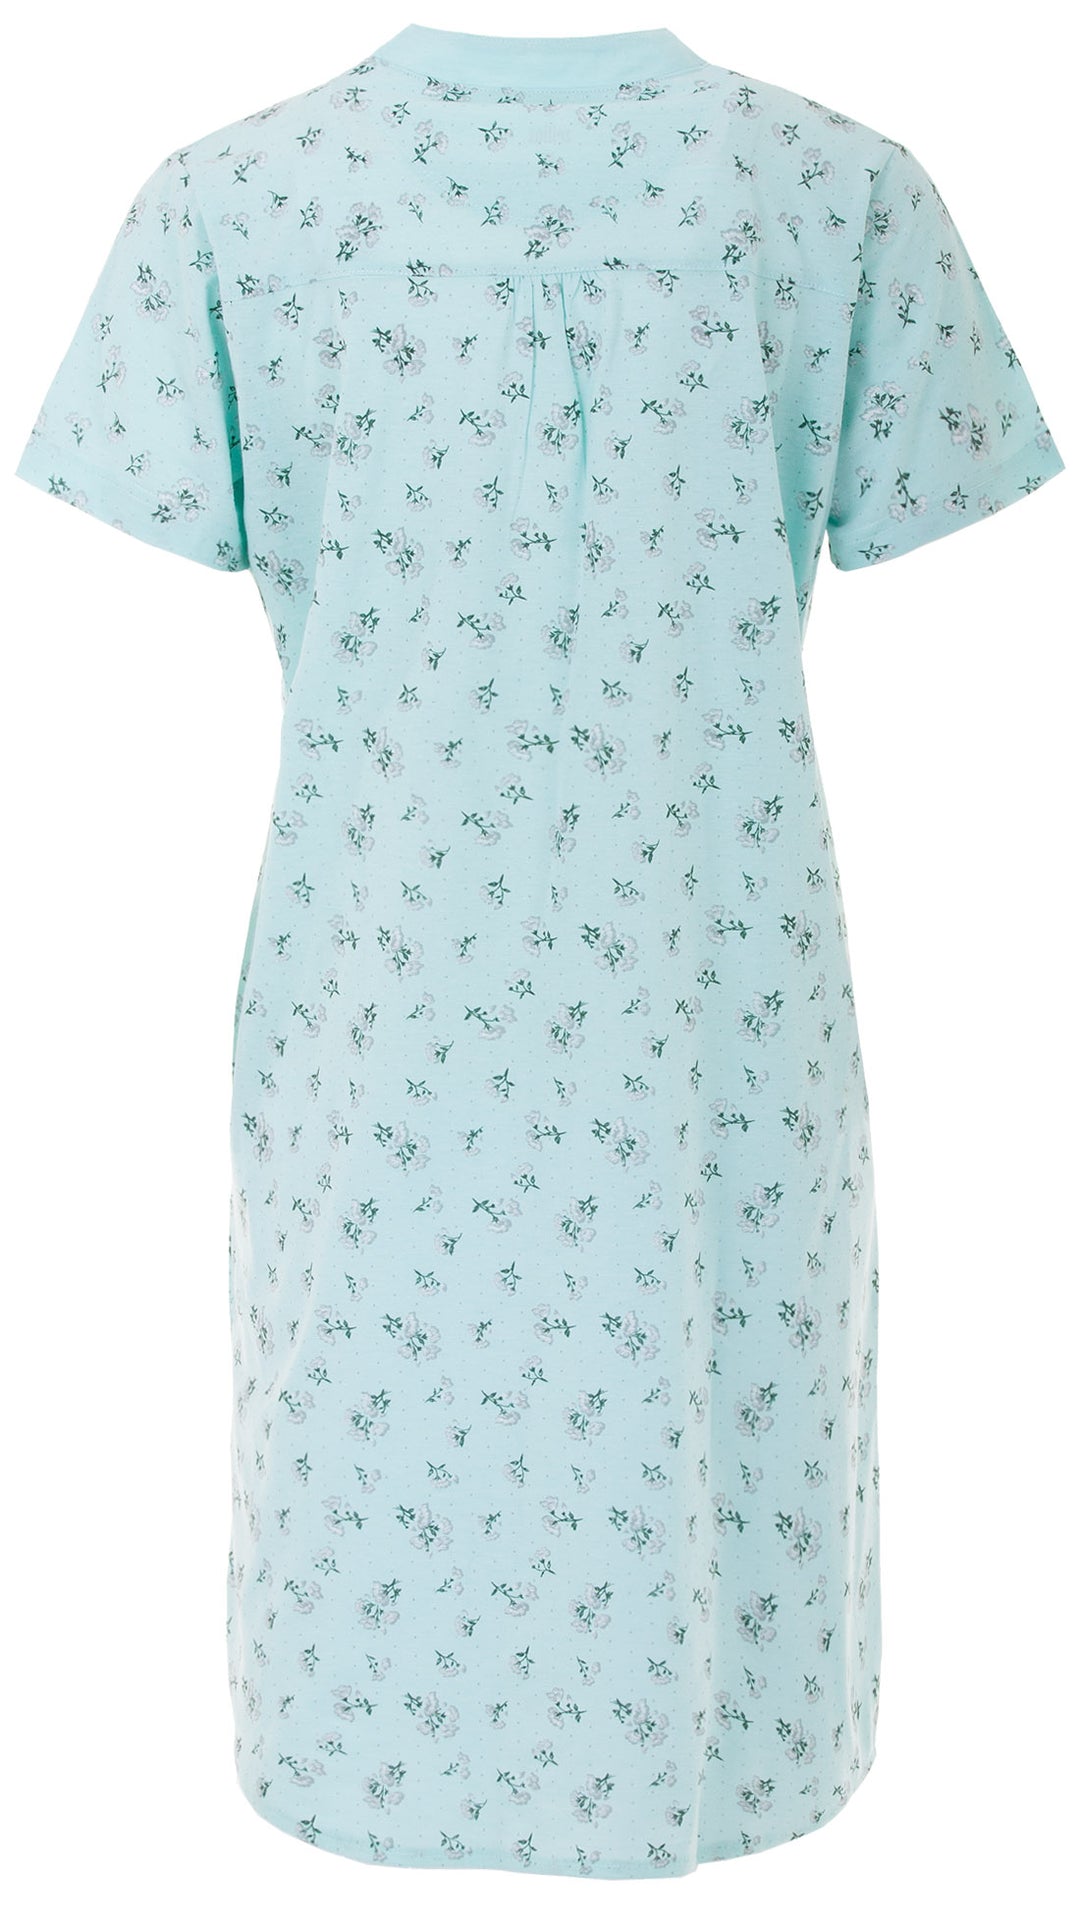 Short-sleeved nightgown - continuous button placket